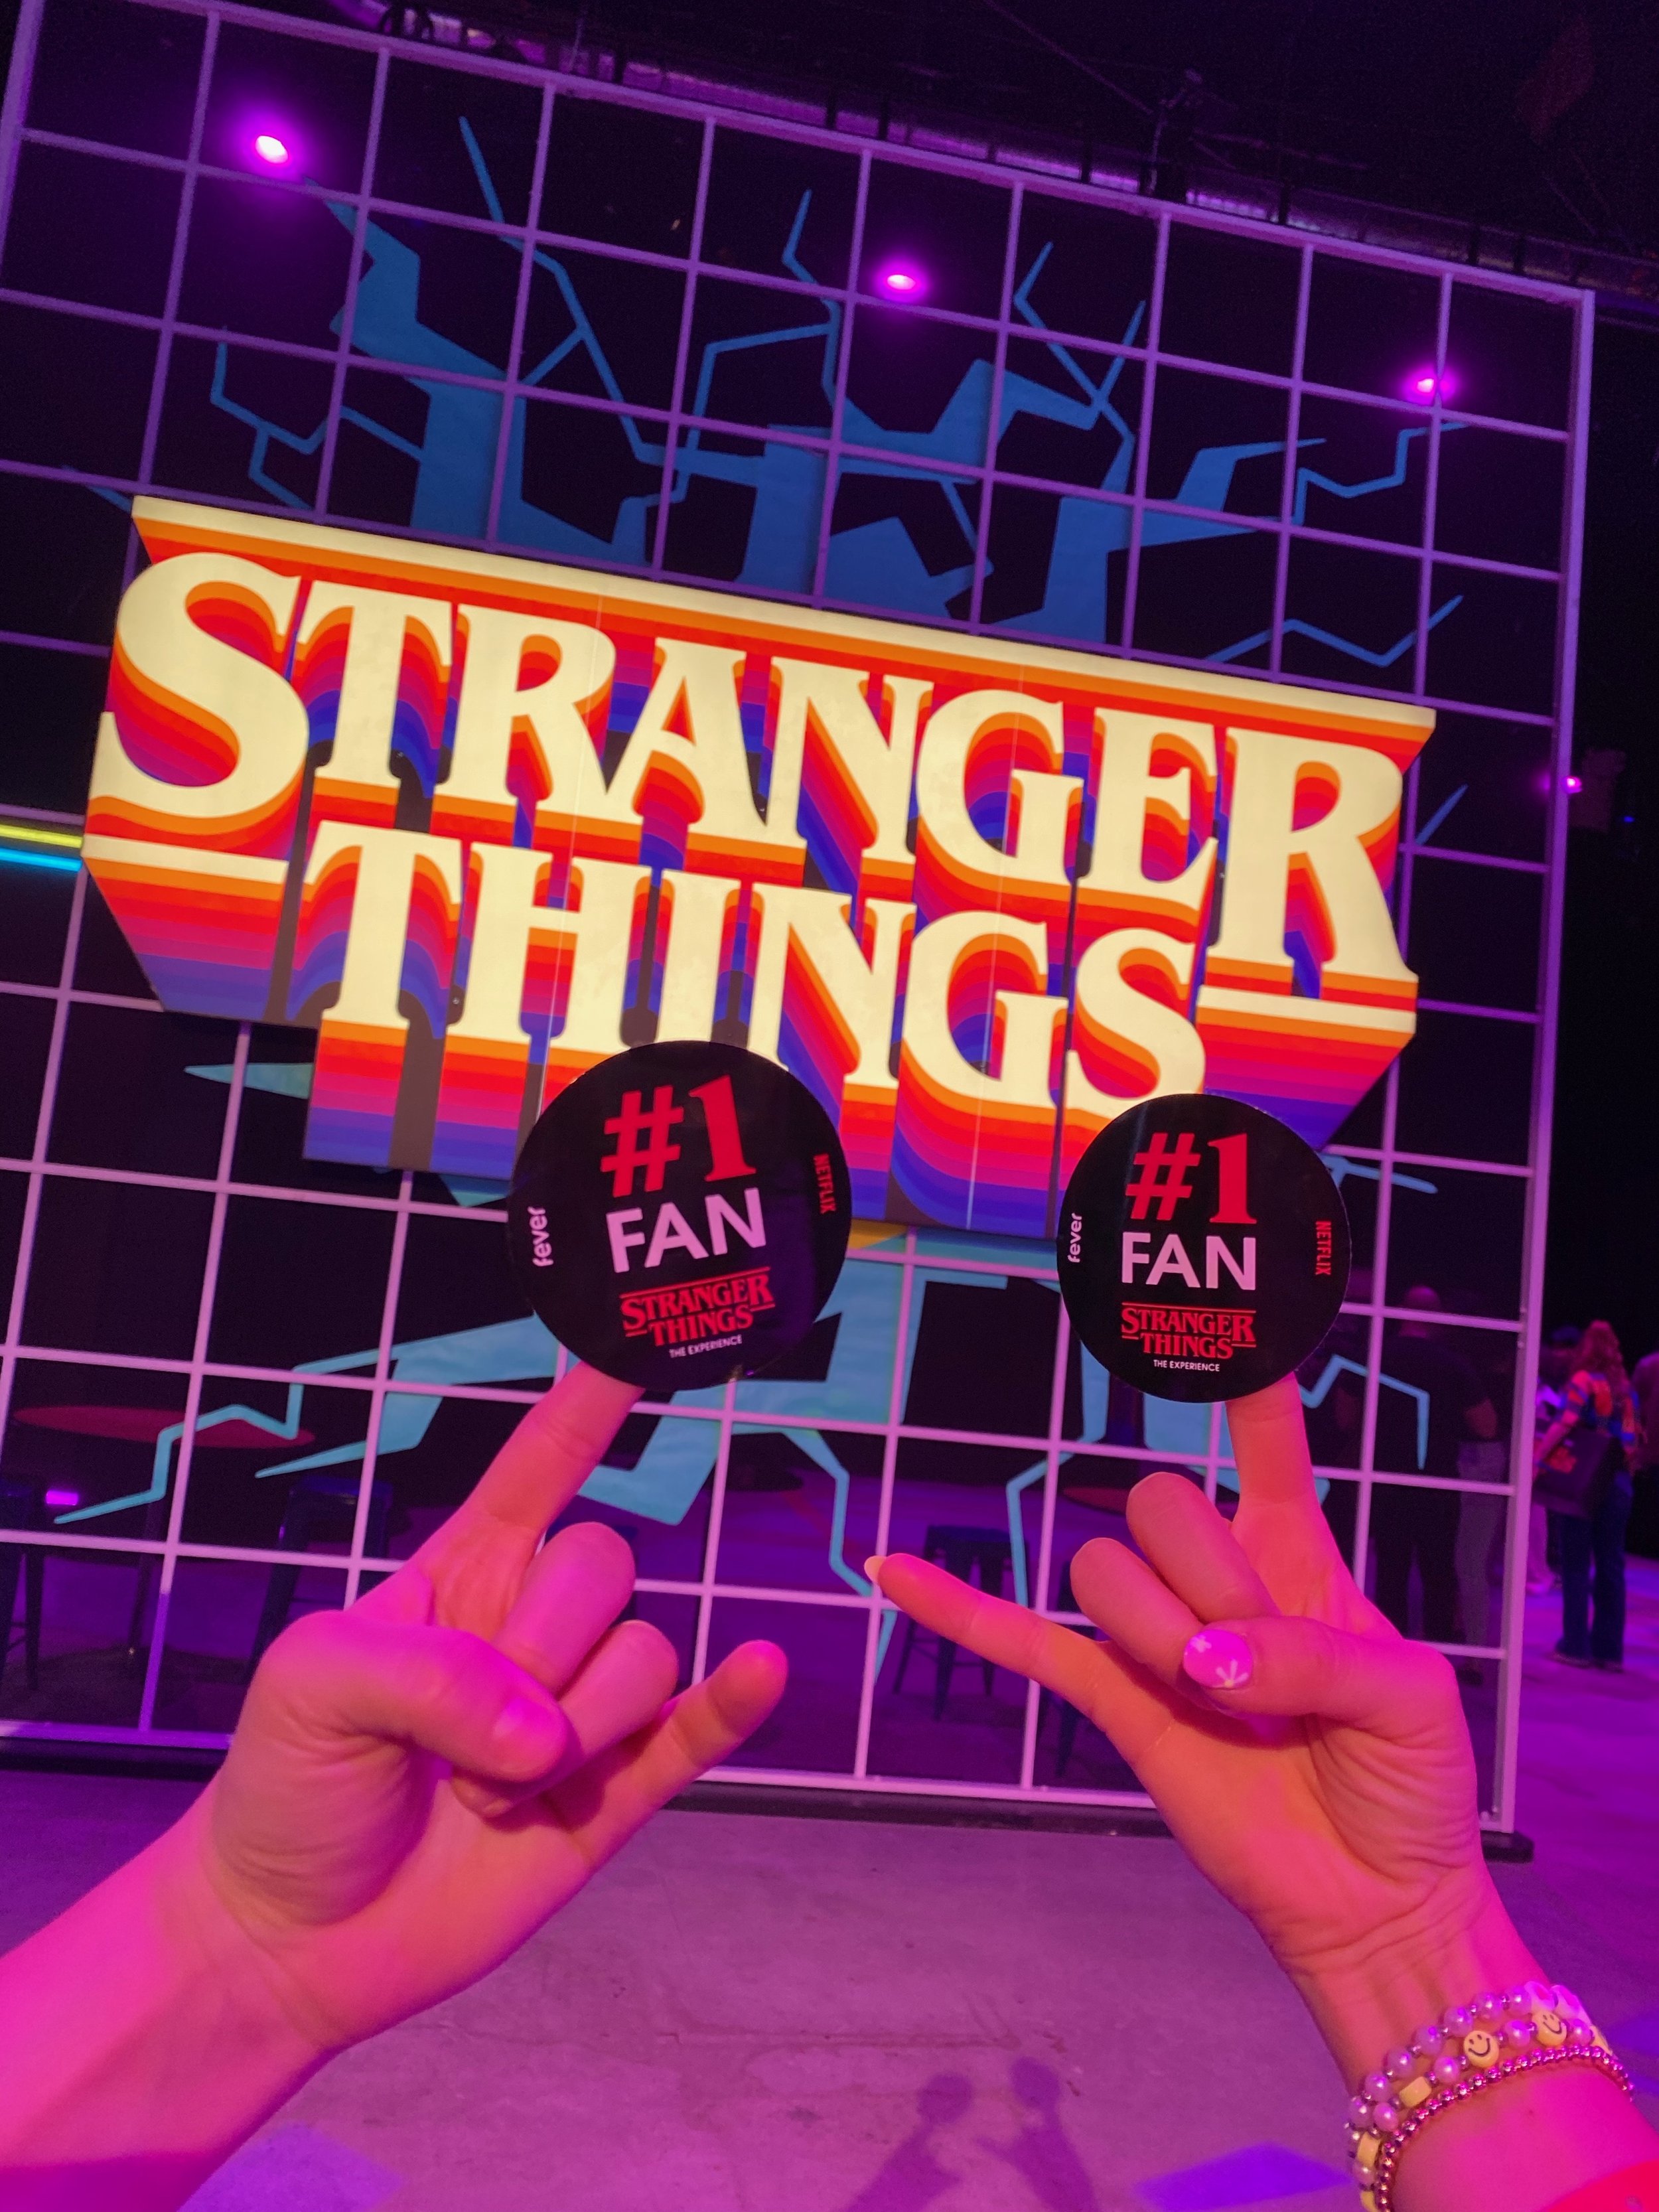 Stranger Things: The Experience Brings the Upside Down to Toronto